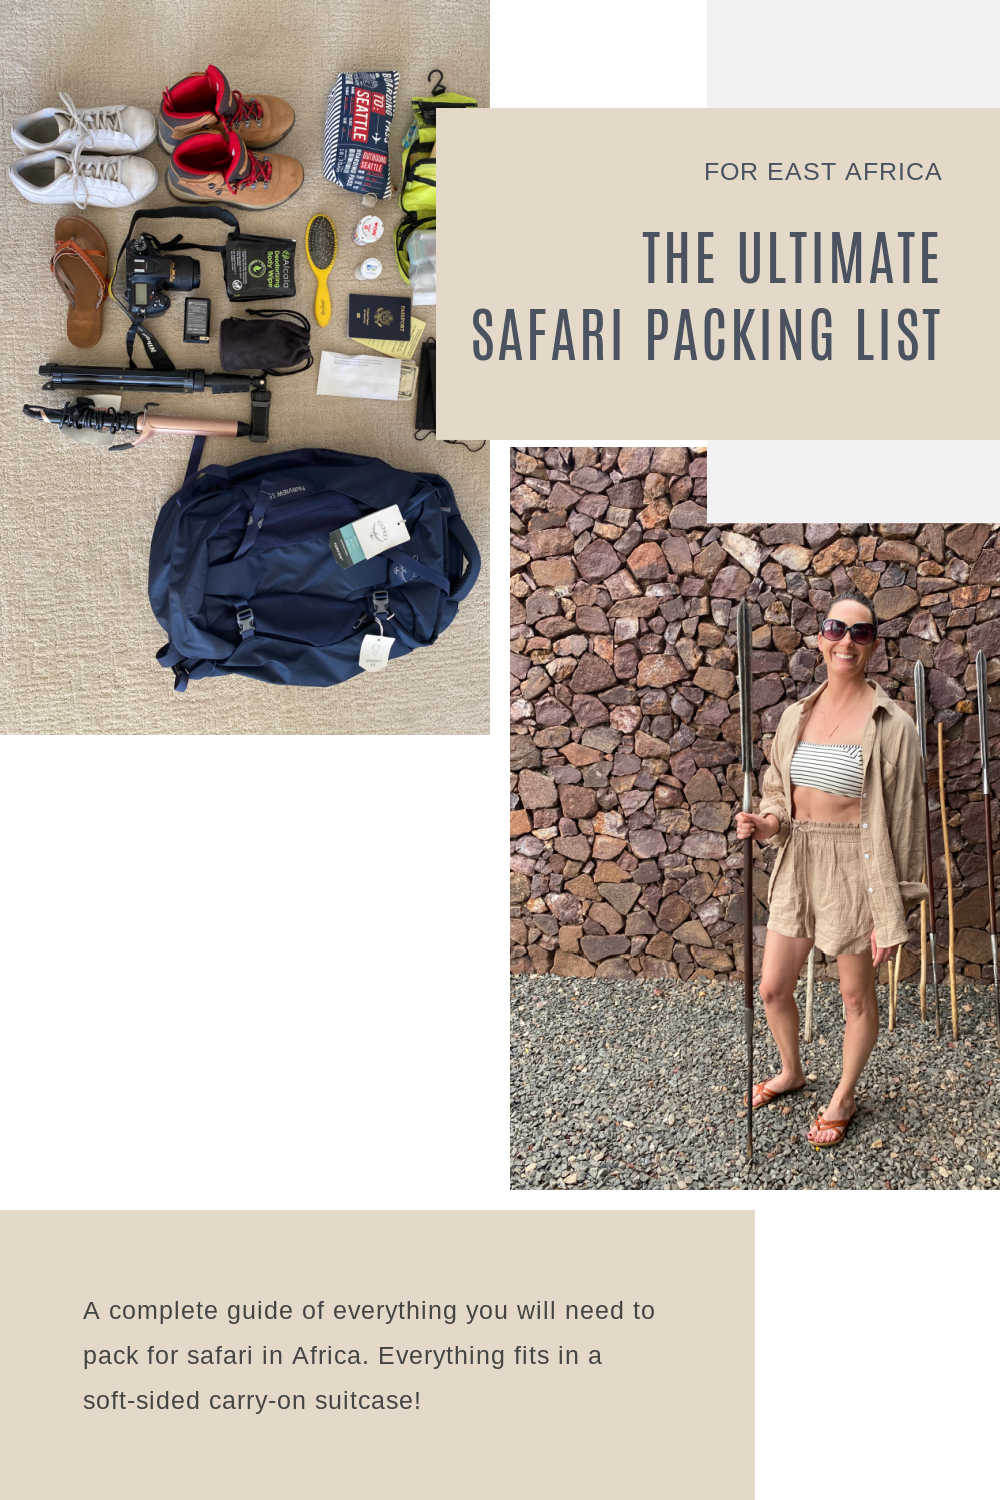 The Ultimate Safari Packing List for East Africa: What We Packed